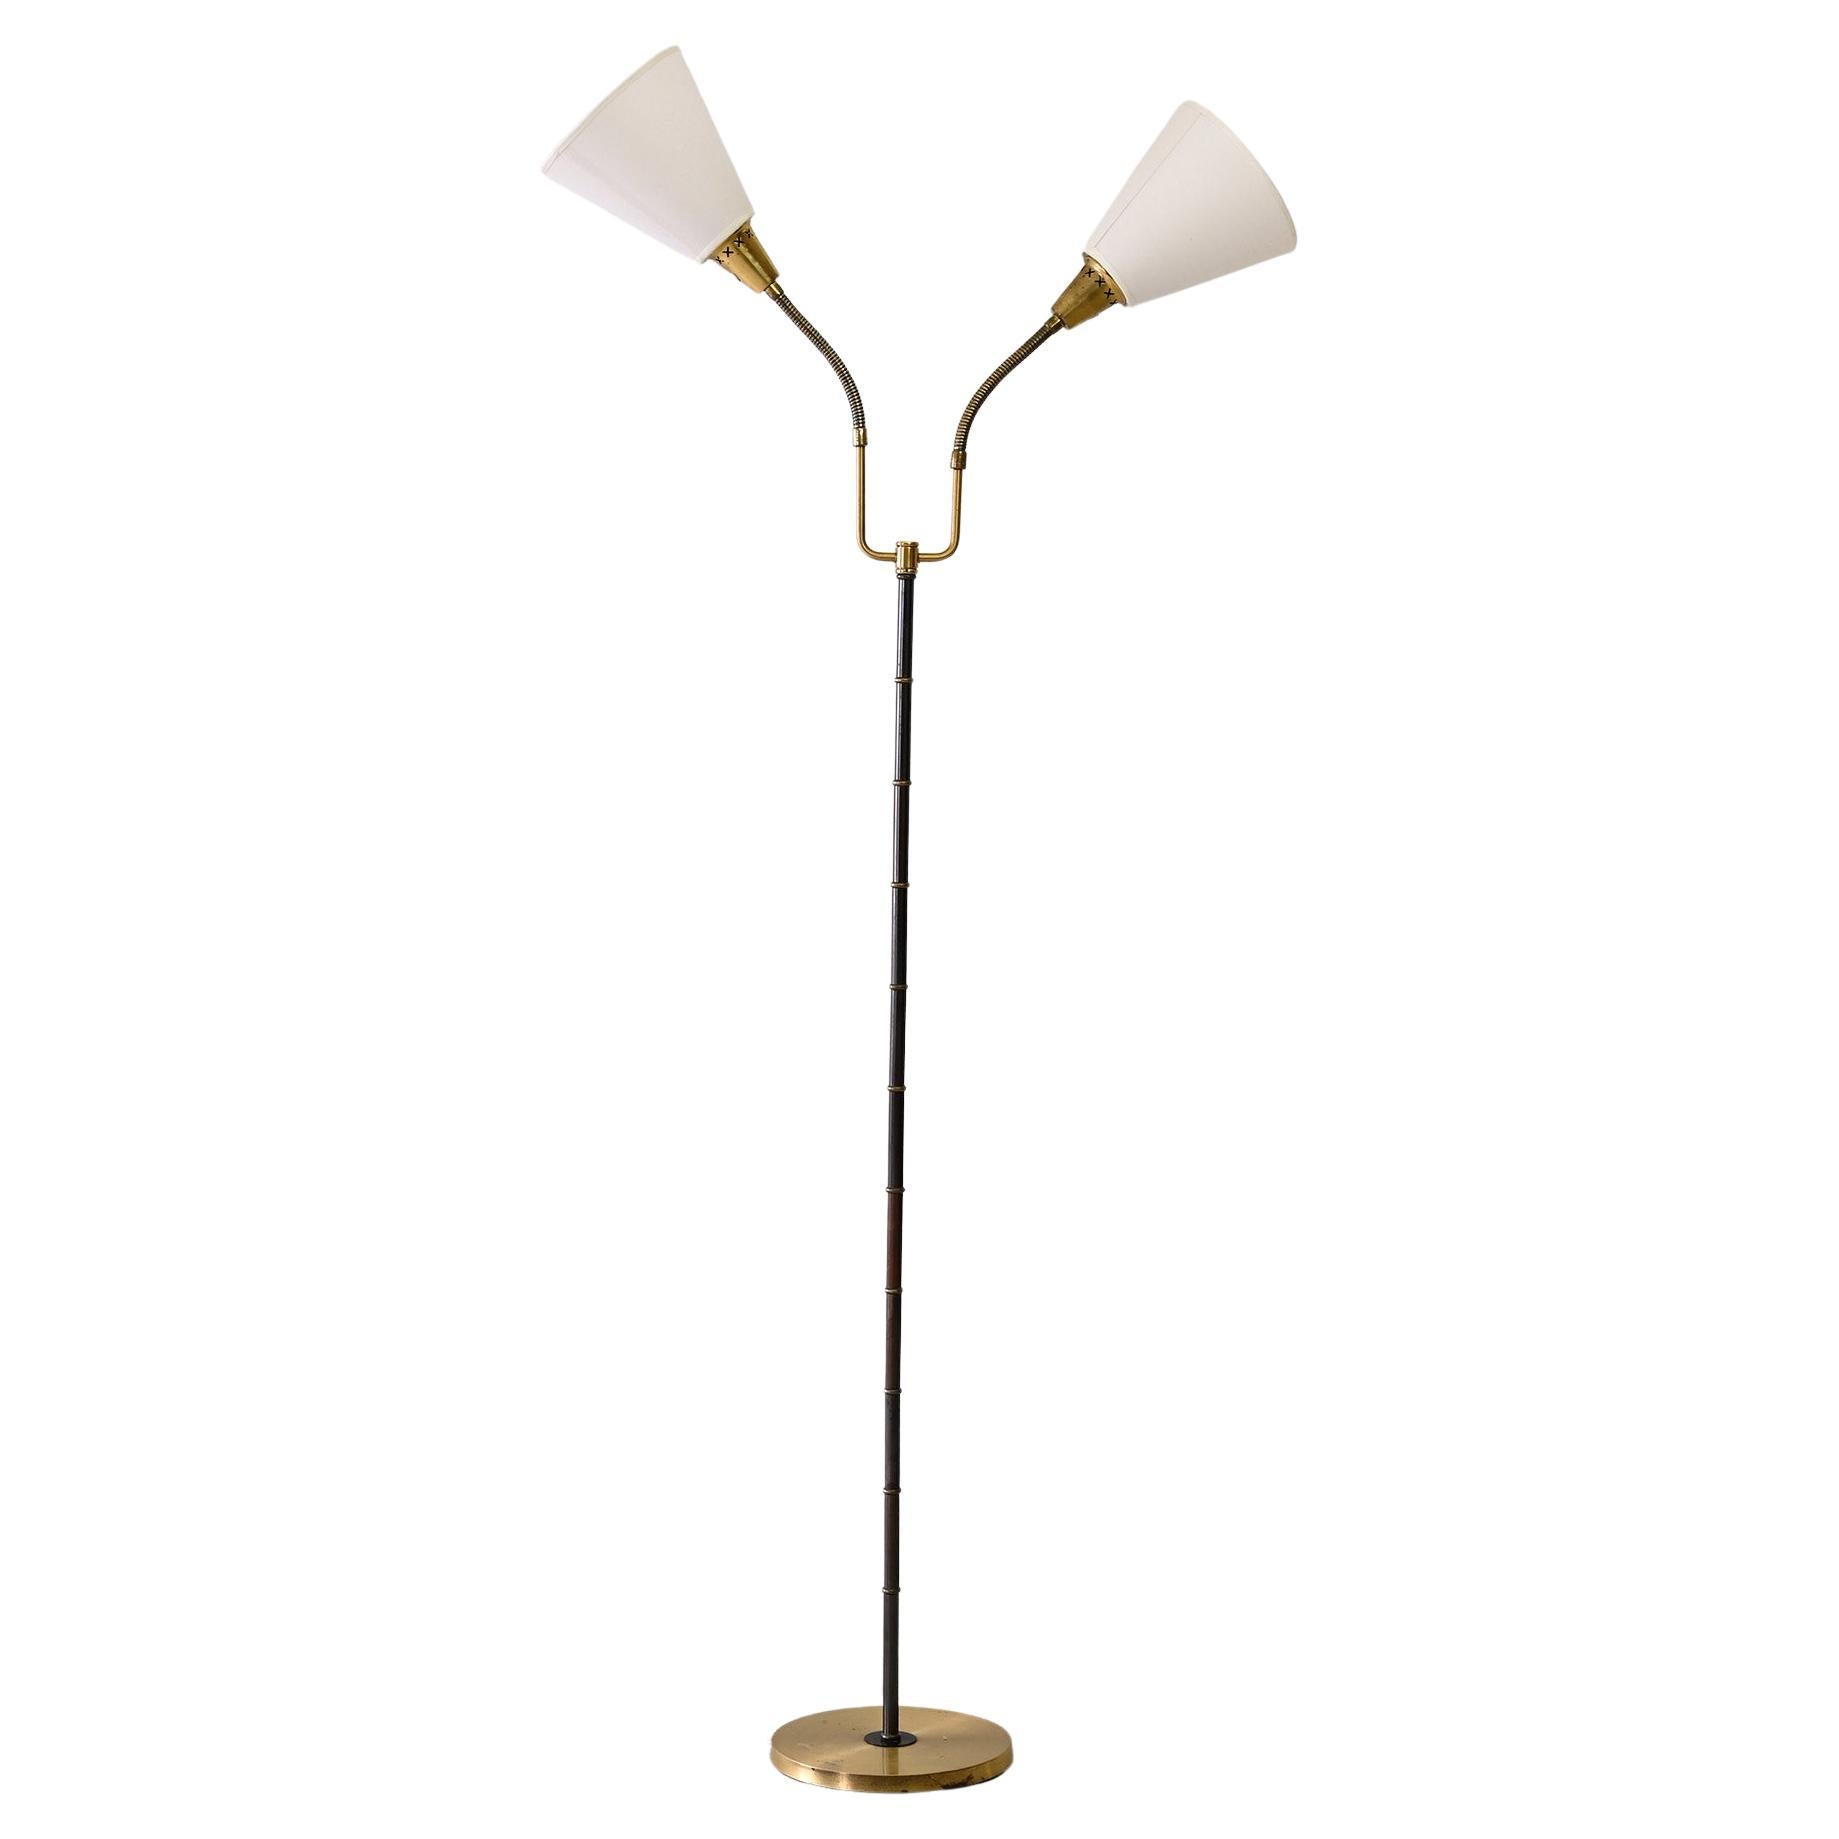 Scandinavian vintage lamp with two adjustable arms For Sale